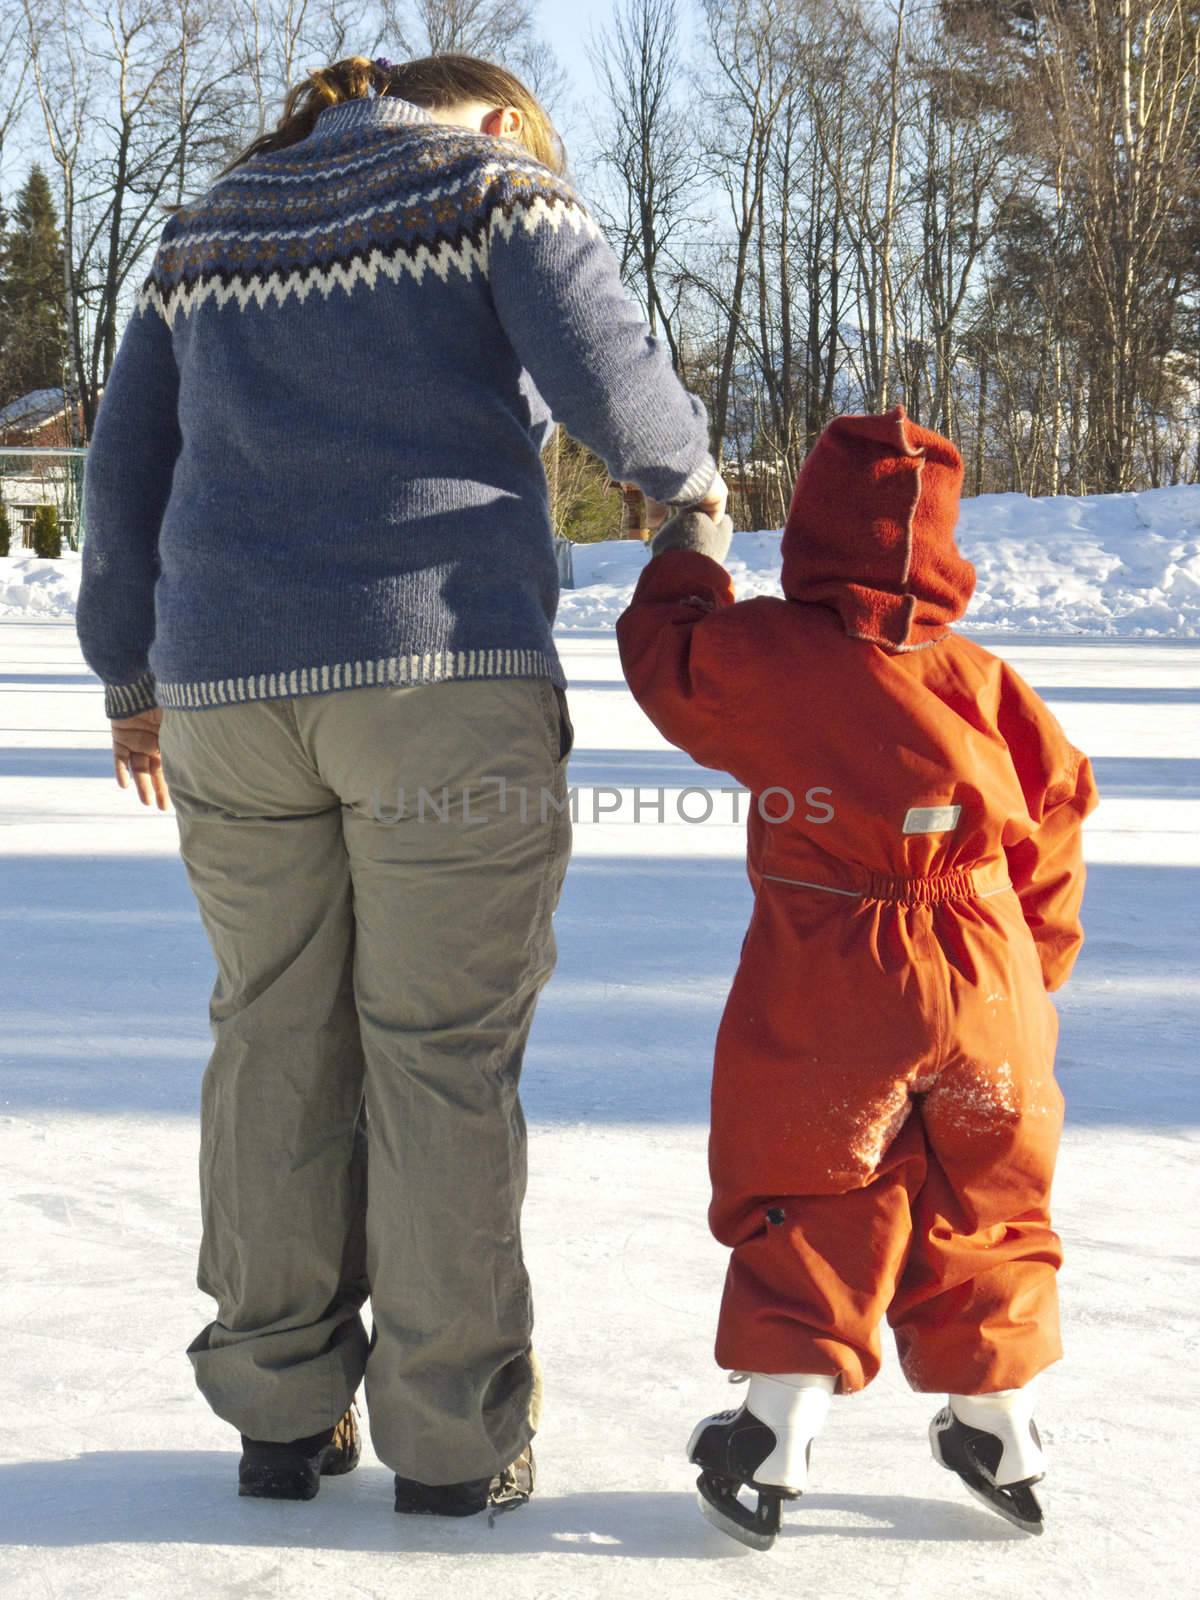 Small child (3 years old) learning to ice skate, holding her mother's hand